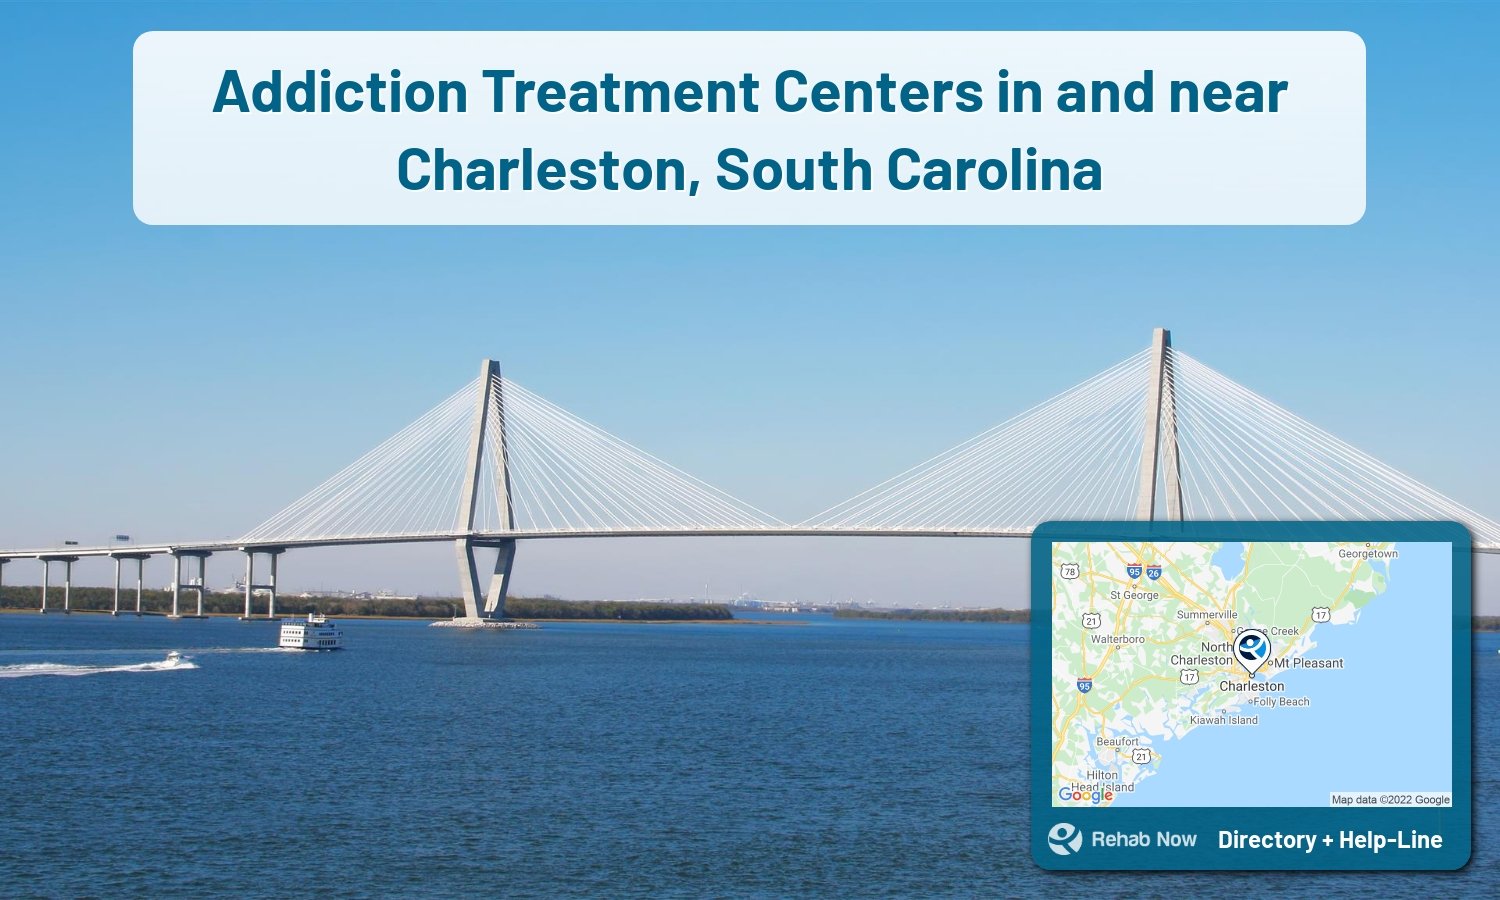 Those struggling with addiction can find help through addiction rehab facilities in Charleston, SC. Get help now!